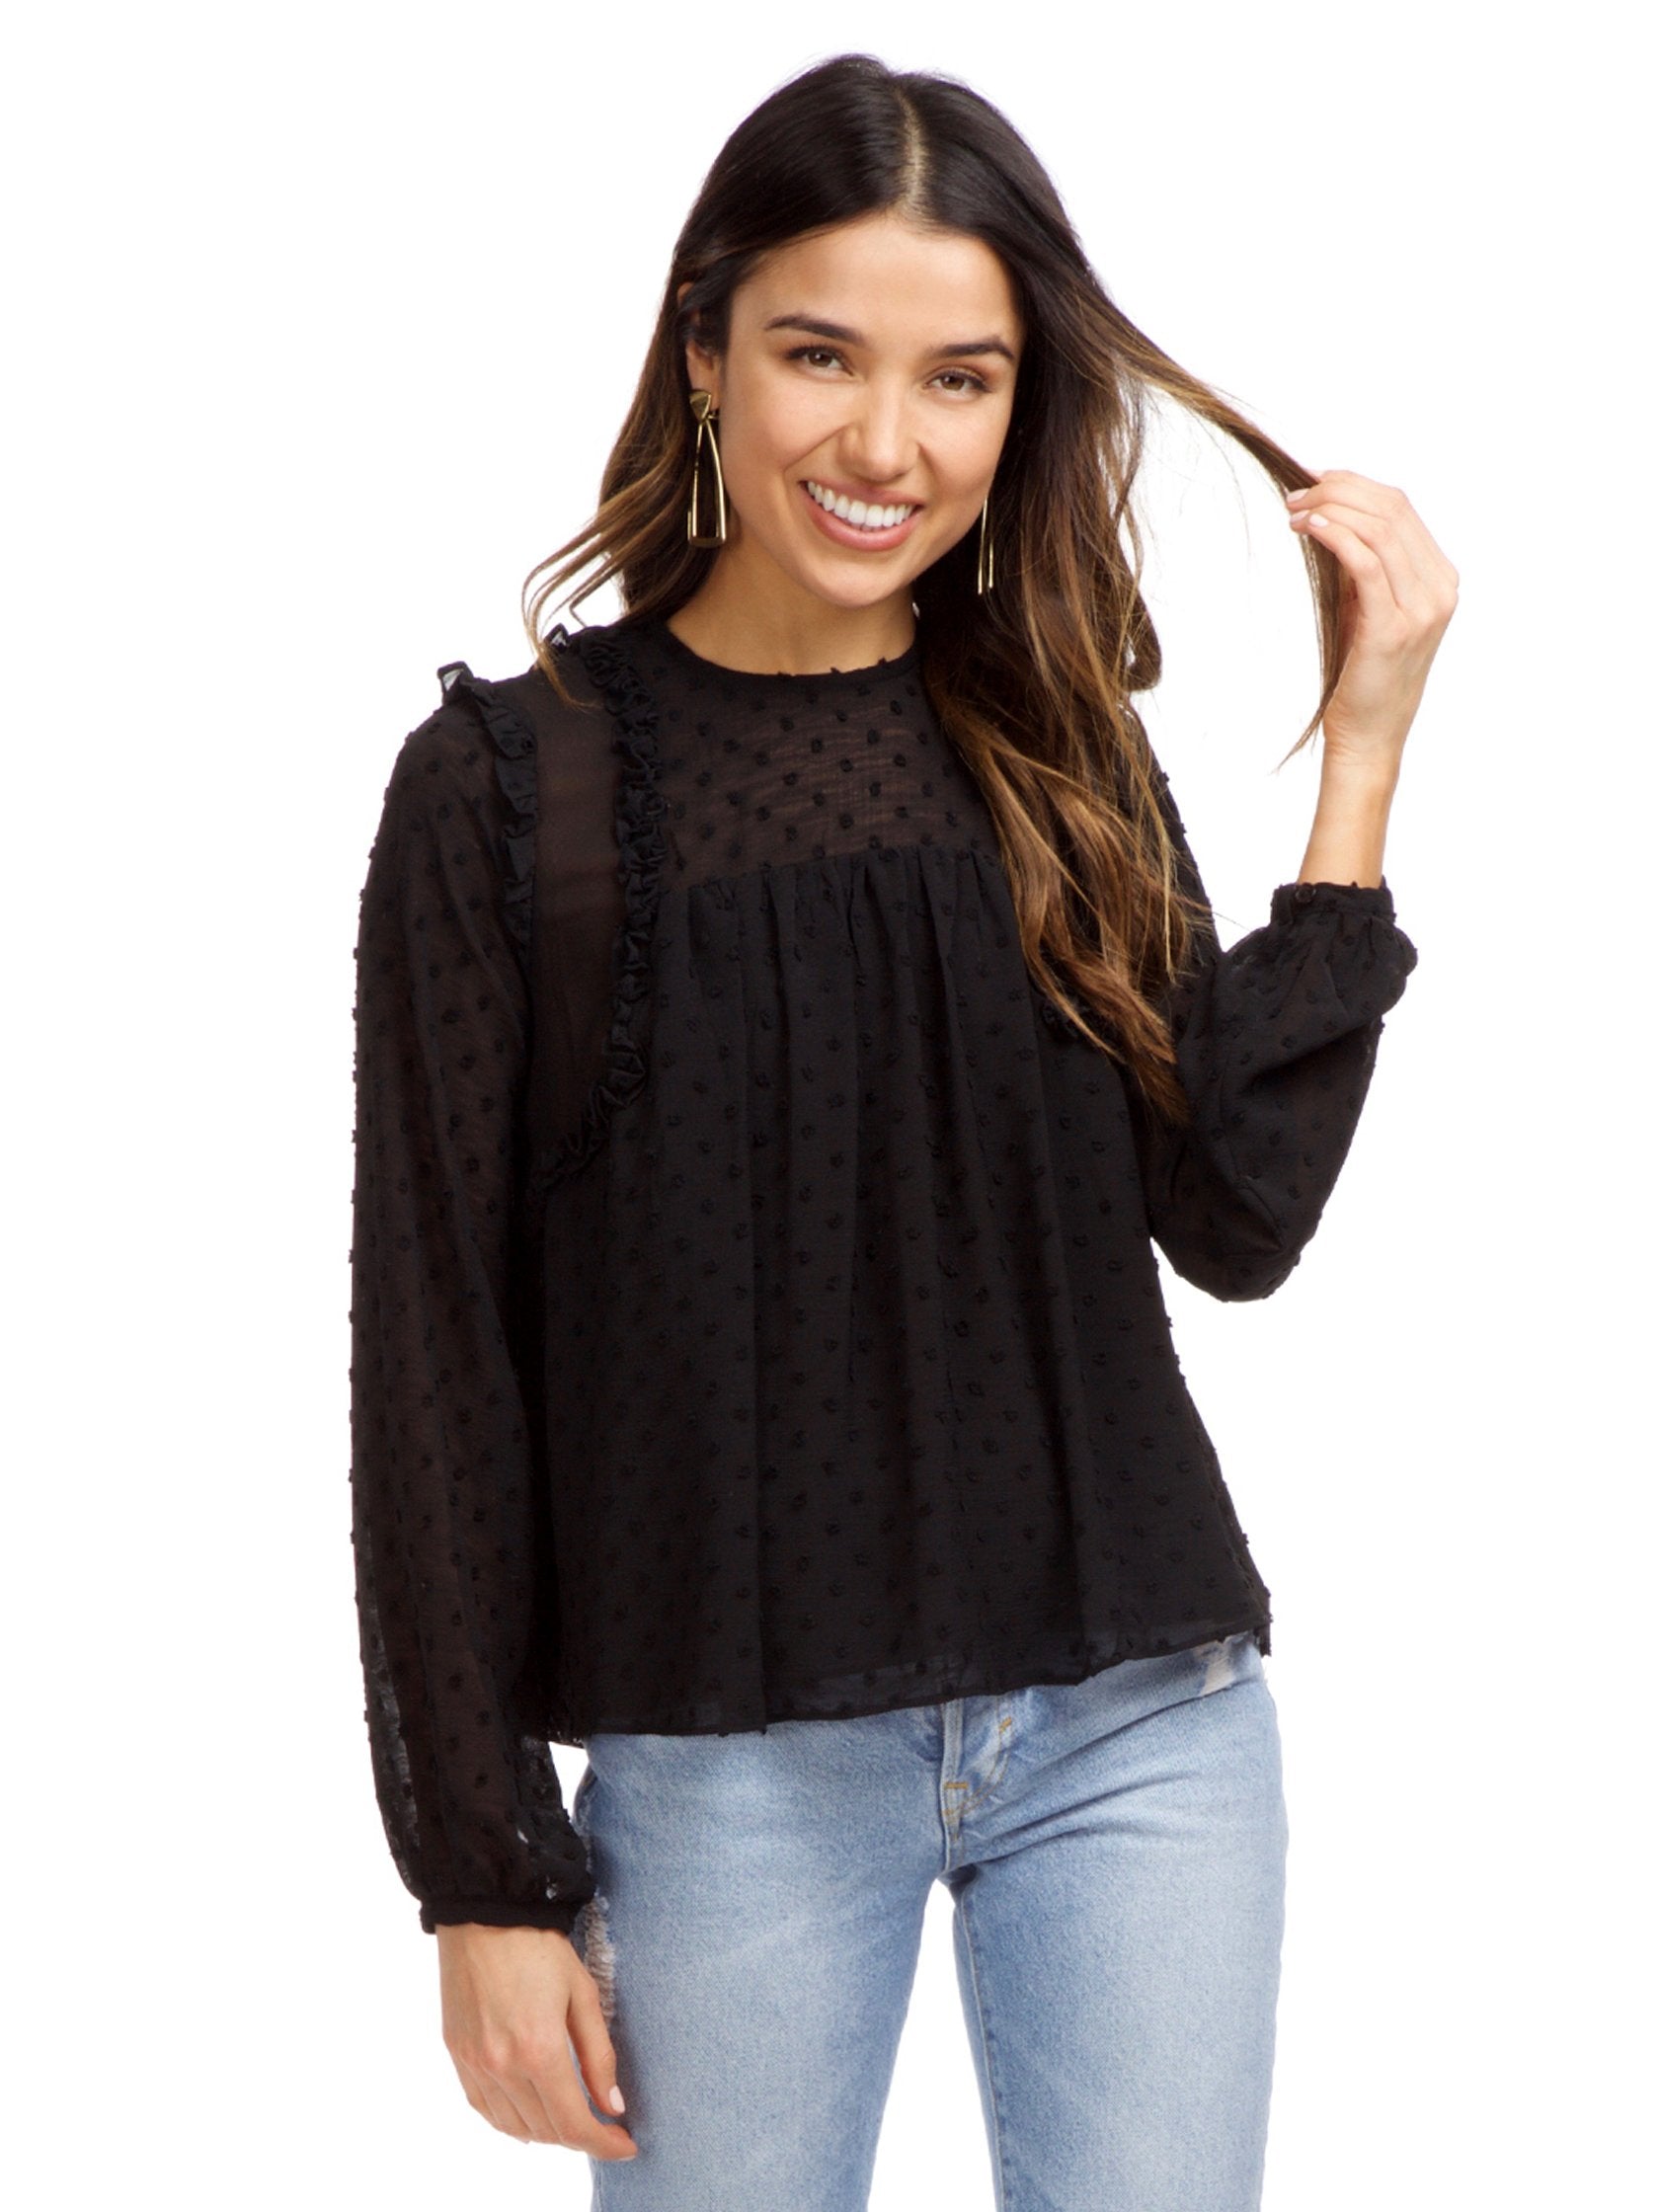 Woman wearing a top rental from Strut & Bolt called Dotted Ruffle Long Sleeve Top